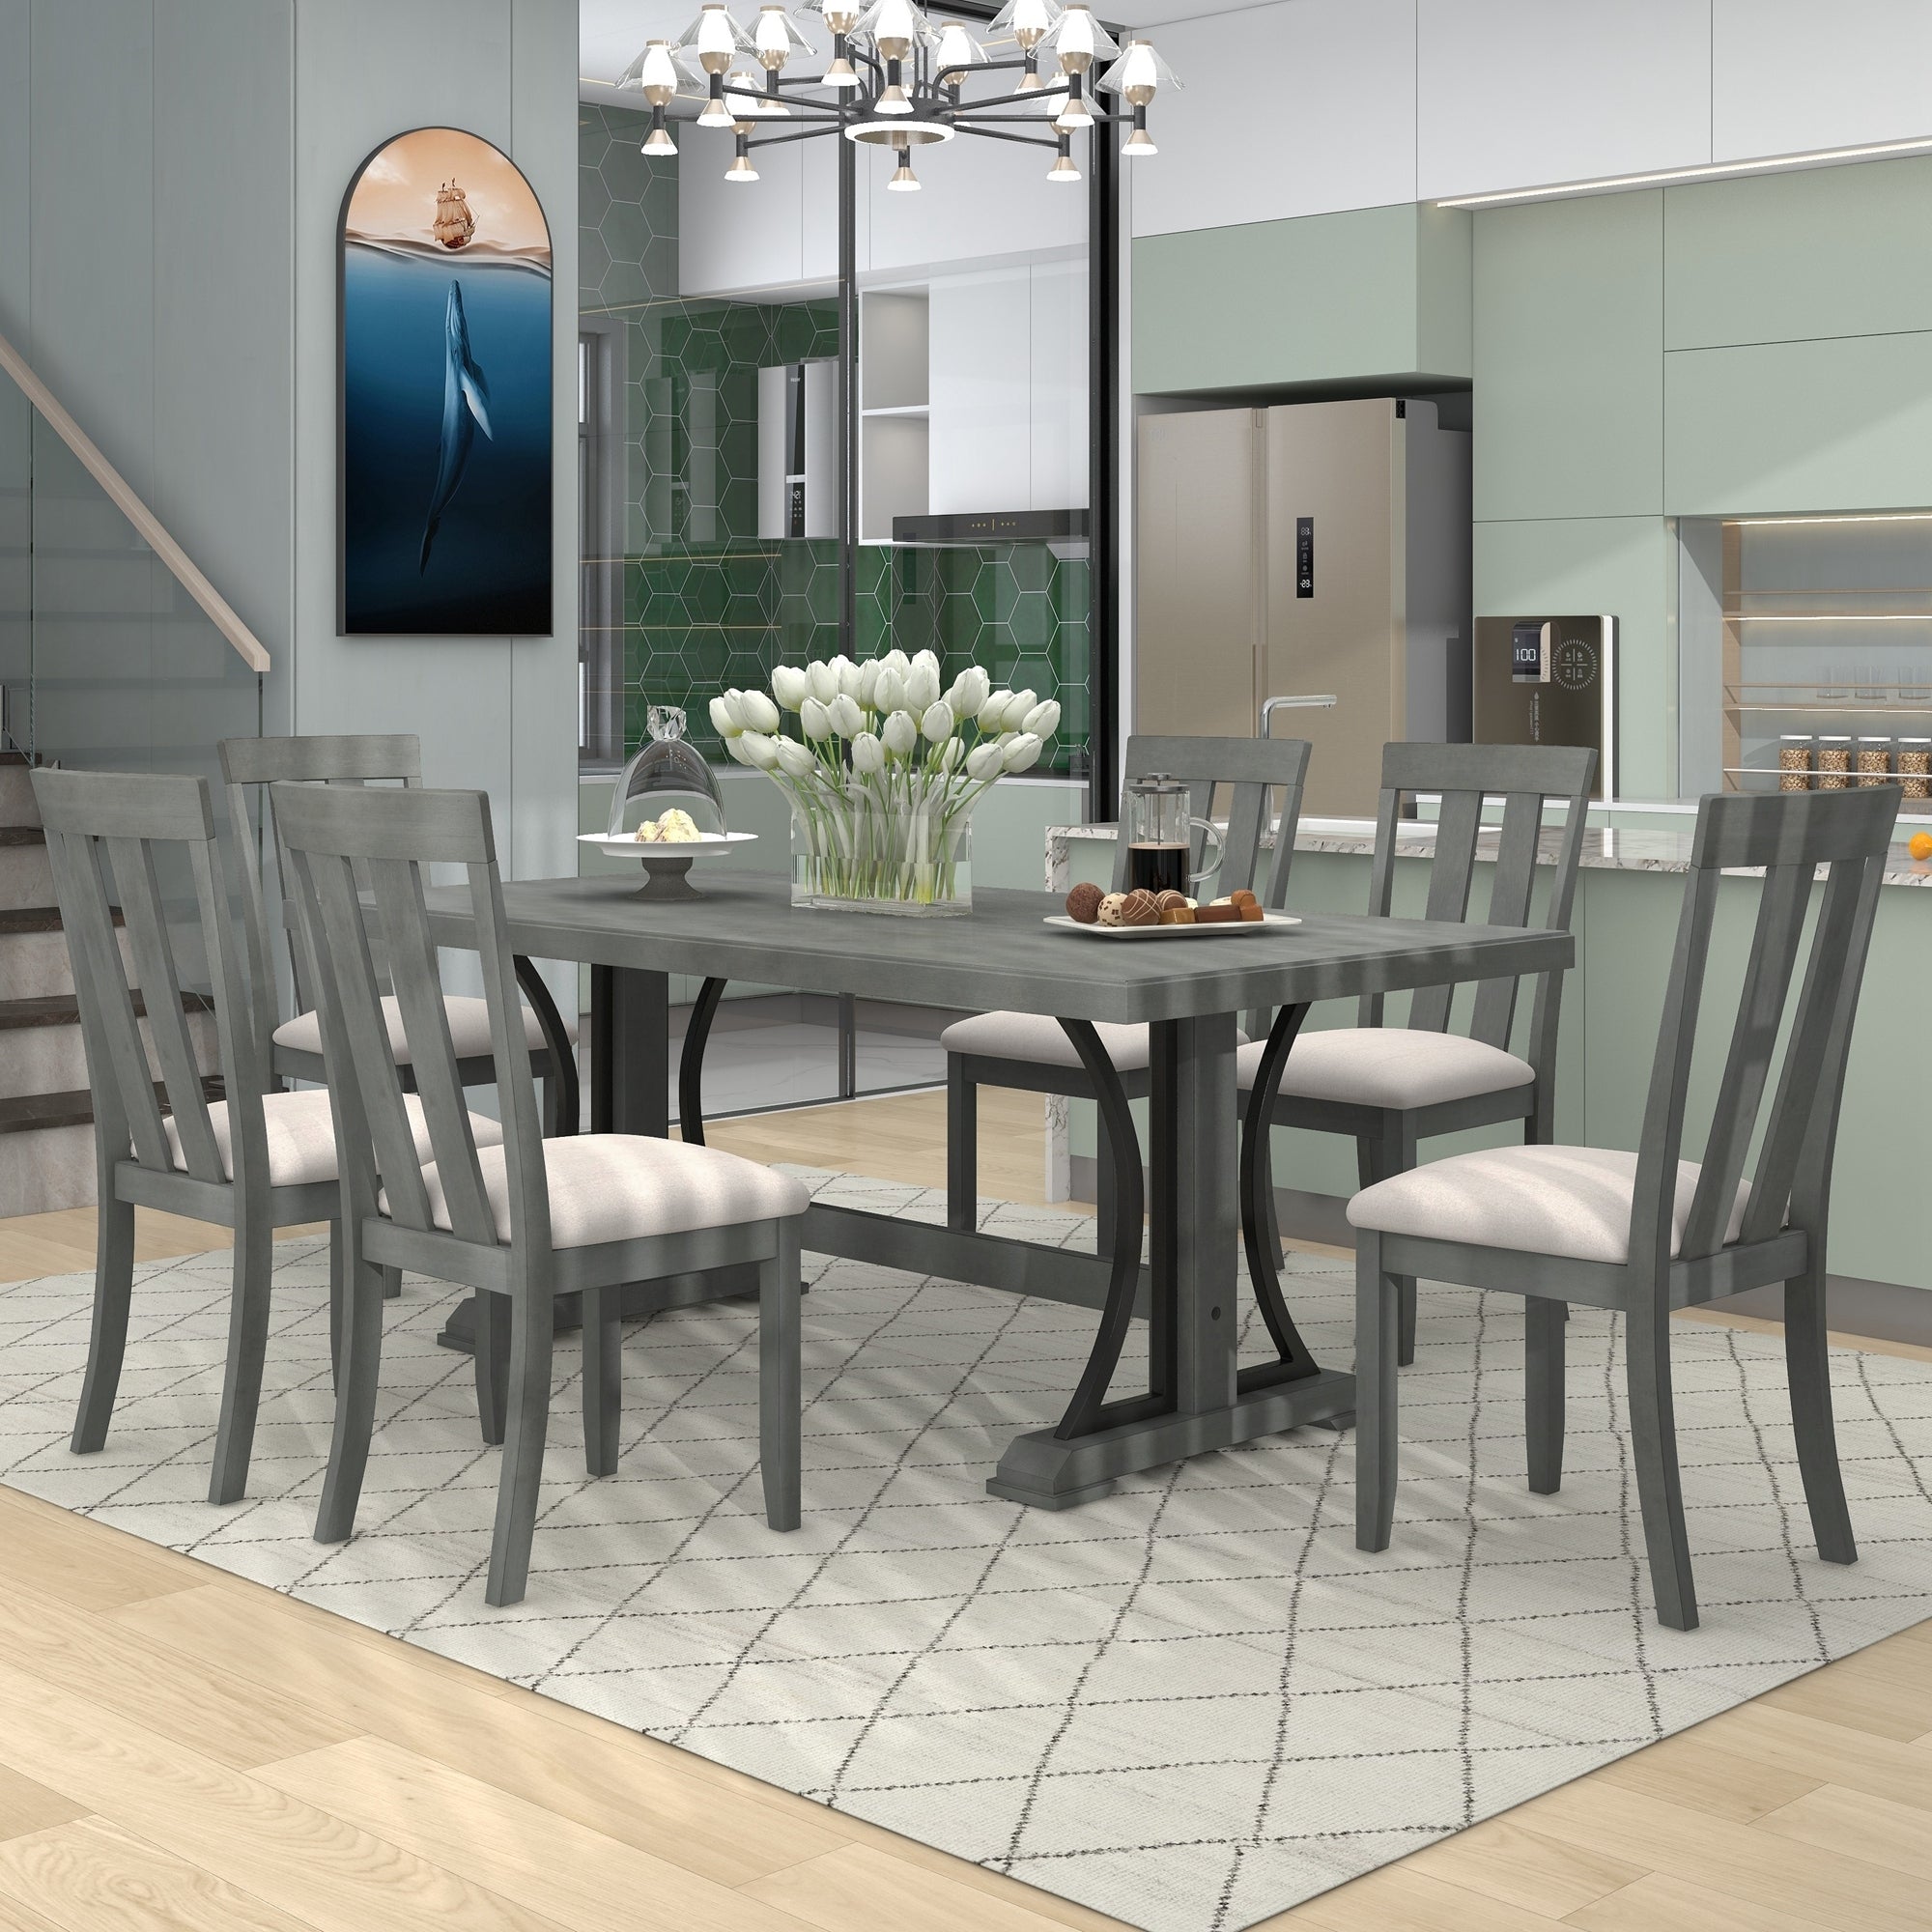 TREXM 7-Piece Retro Style Dining Table Set 78" Wood Rectangular Table and 6 Dining Chairs for Dining Room (Gray)